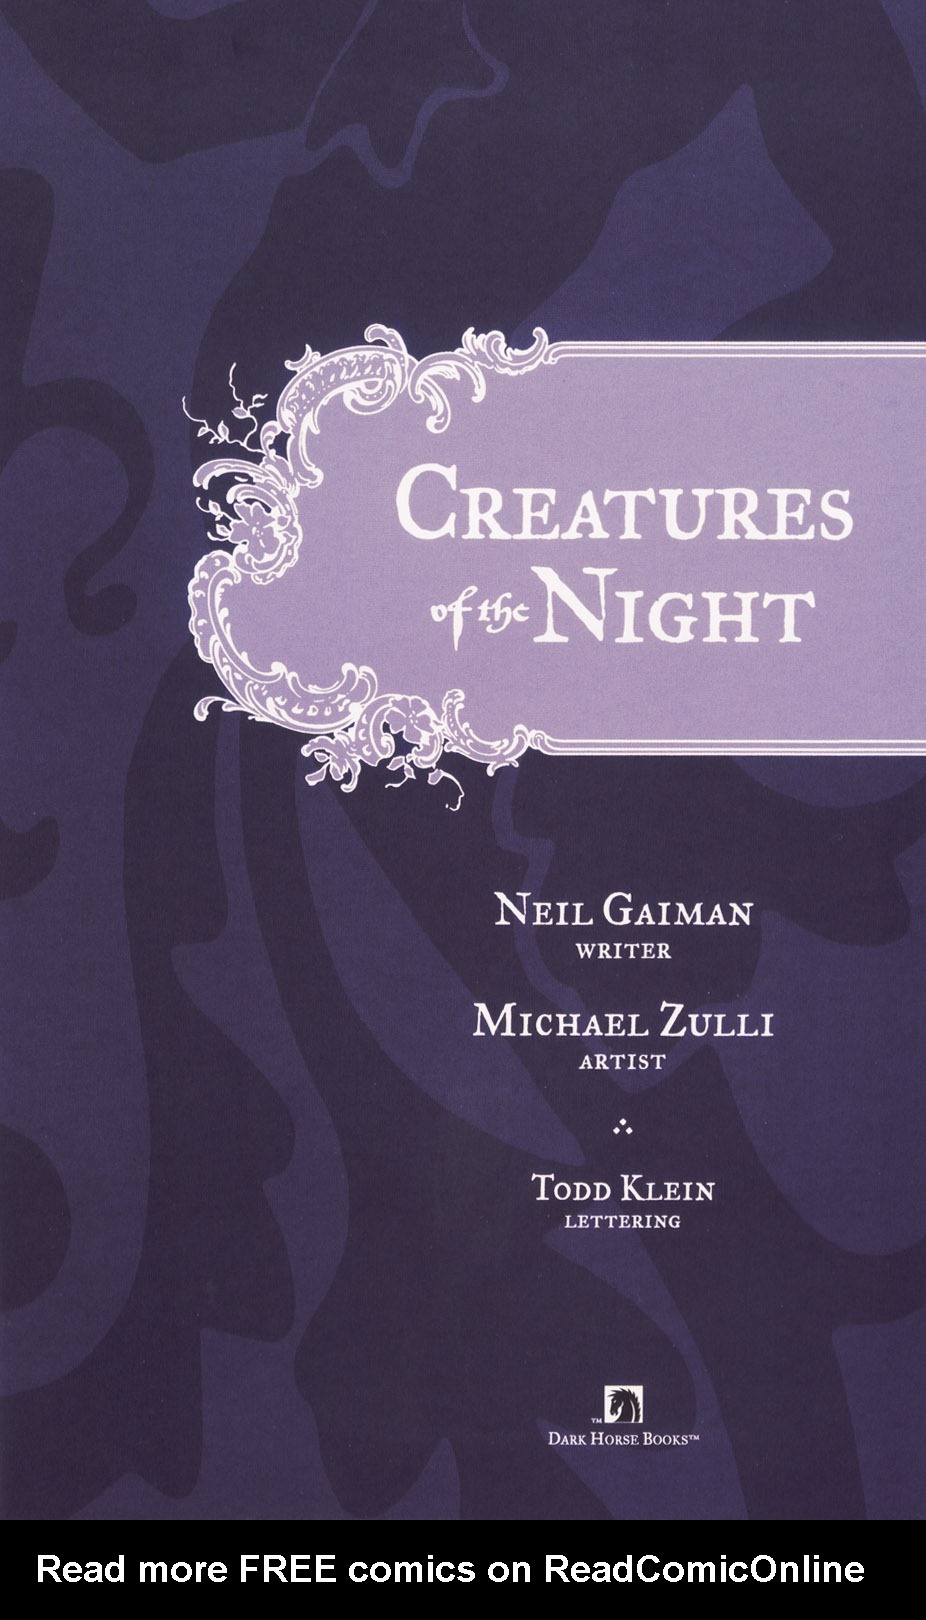 Read online Creatures of the Night comic -  Issue # Full - 2